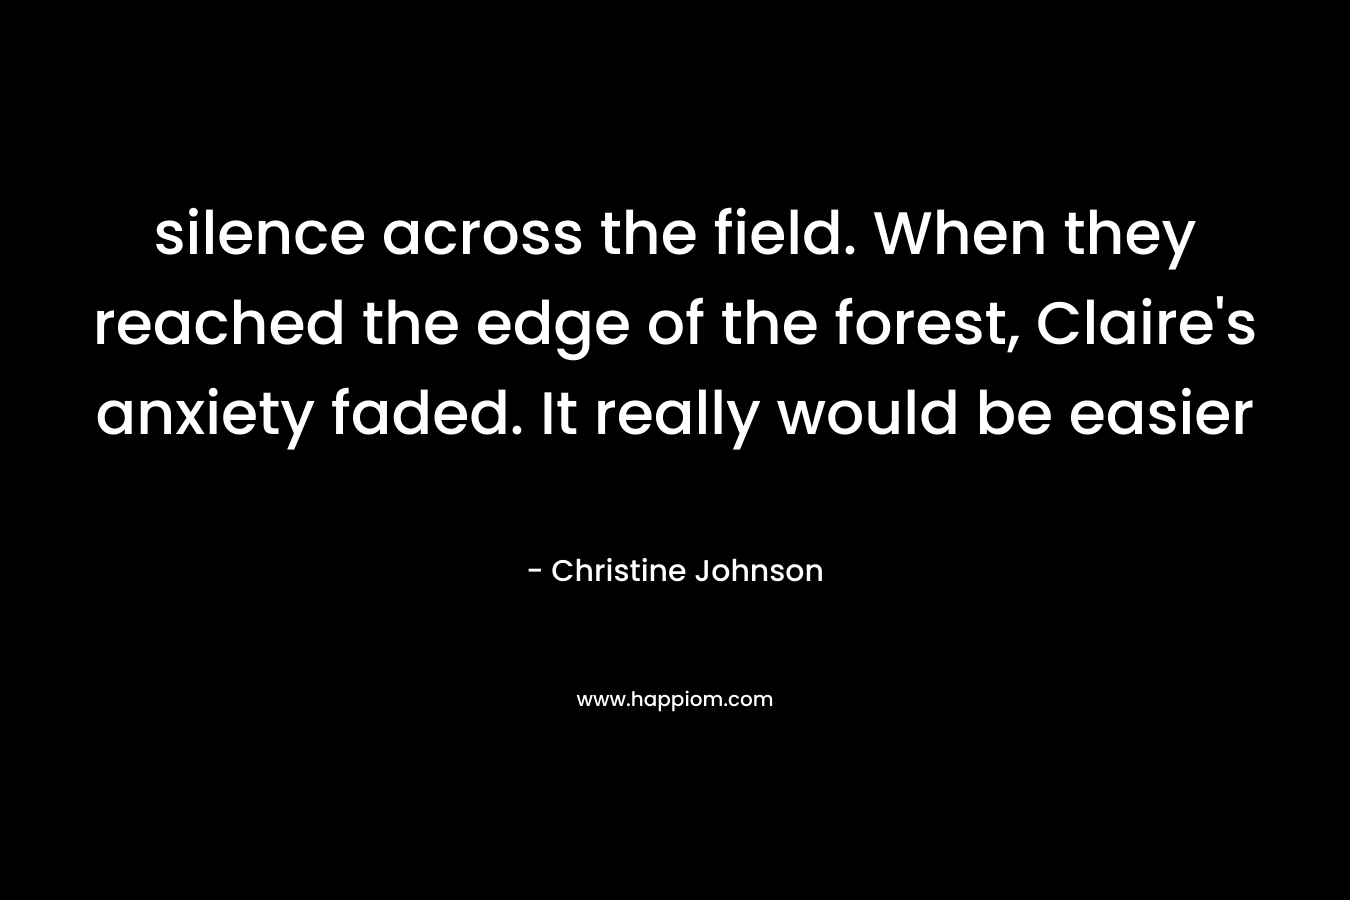 silence across the field. When they reached the edge of the forest, Claire’s anxiety faded. It really would be easier – Christine Johnson